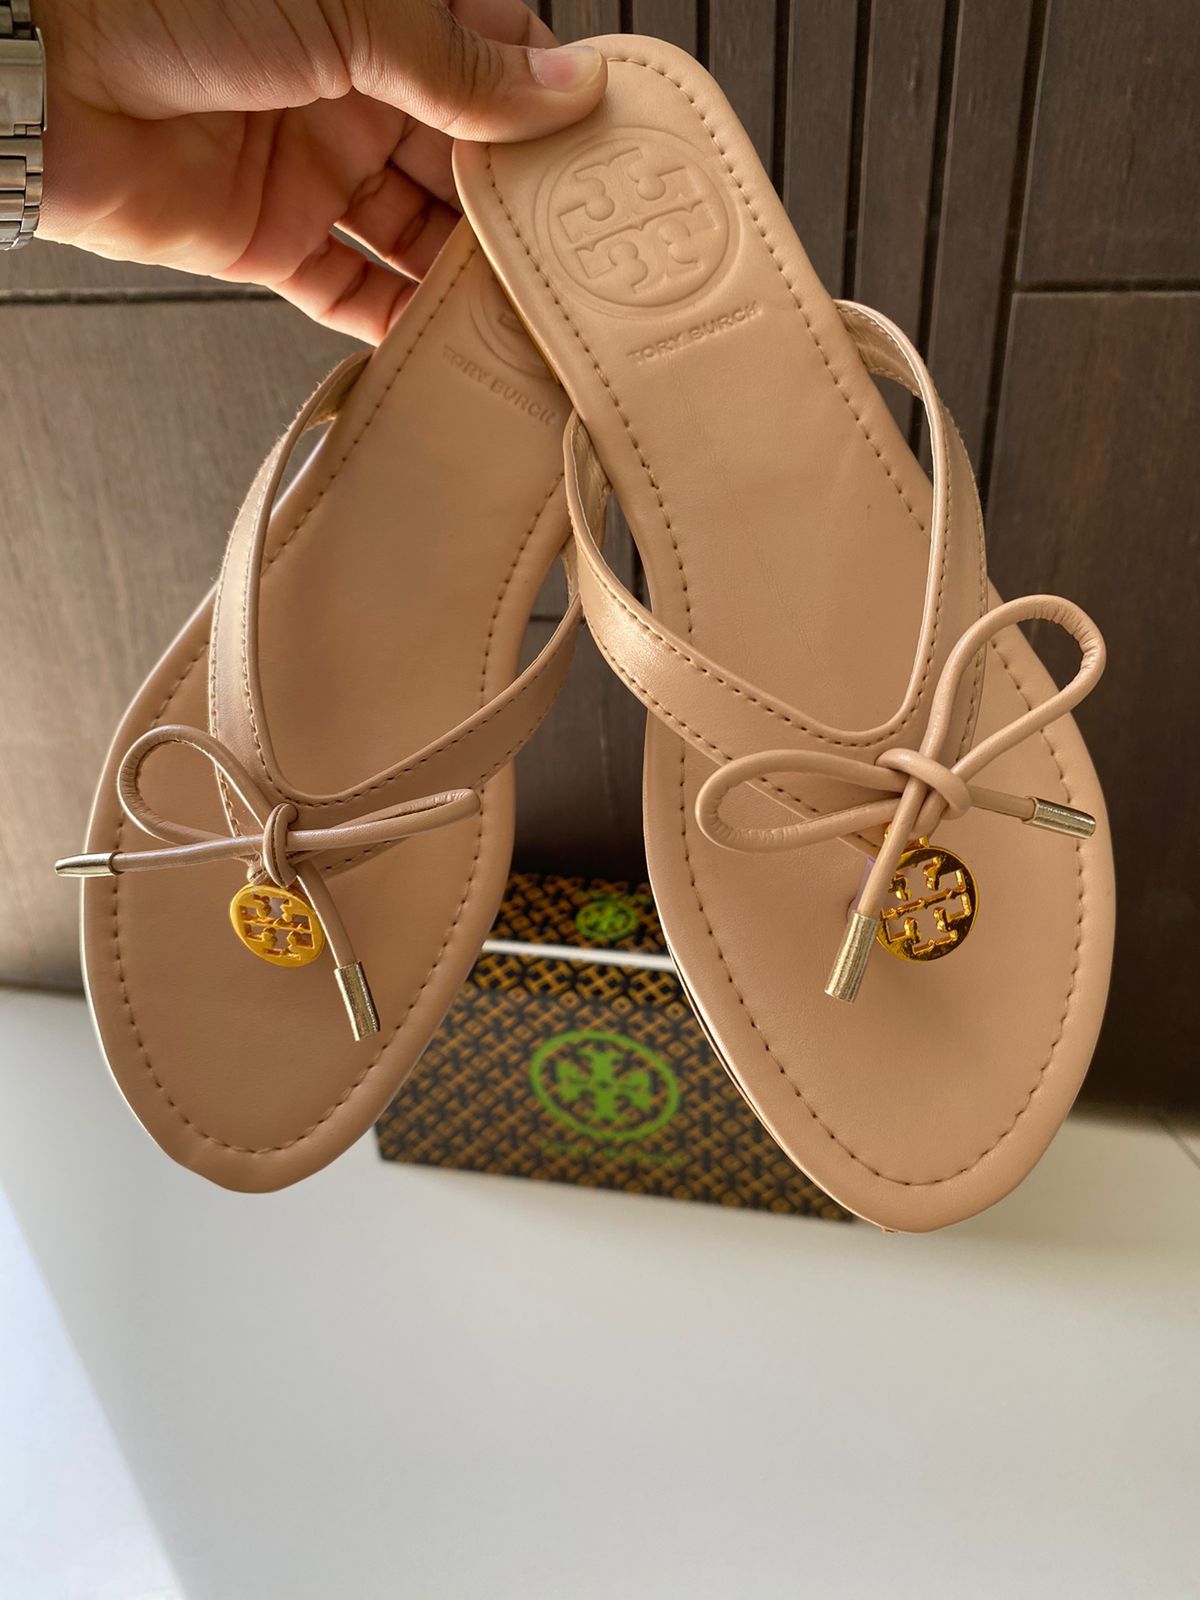 Best Price Tory Burch Bow Knot Slippers